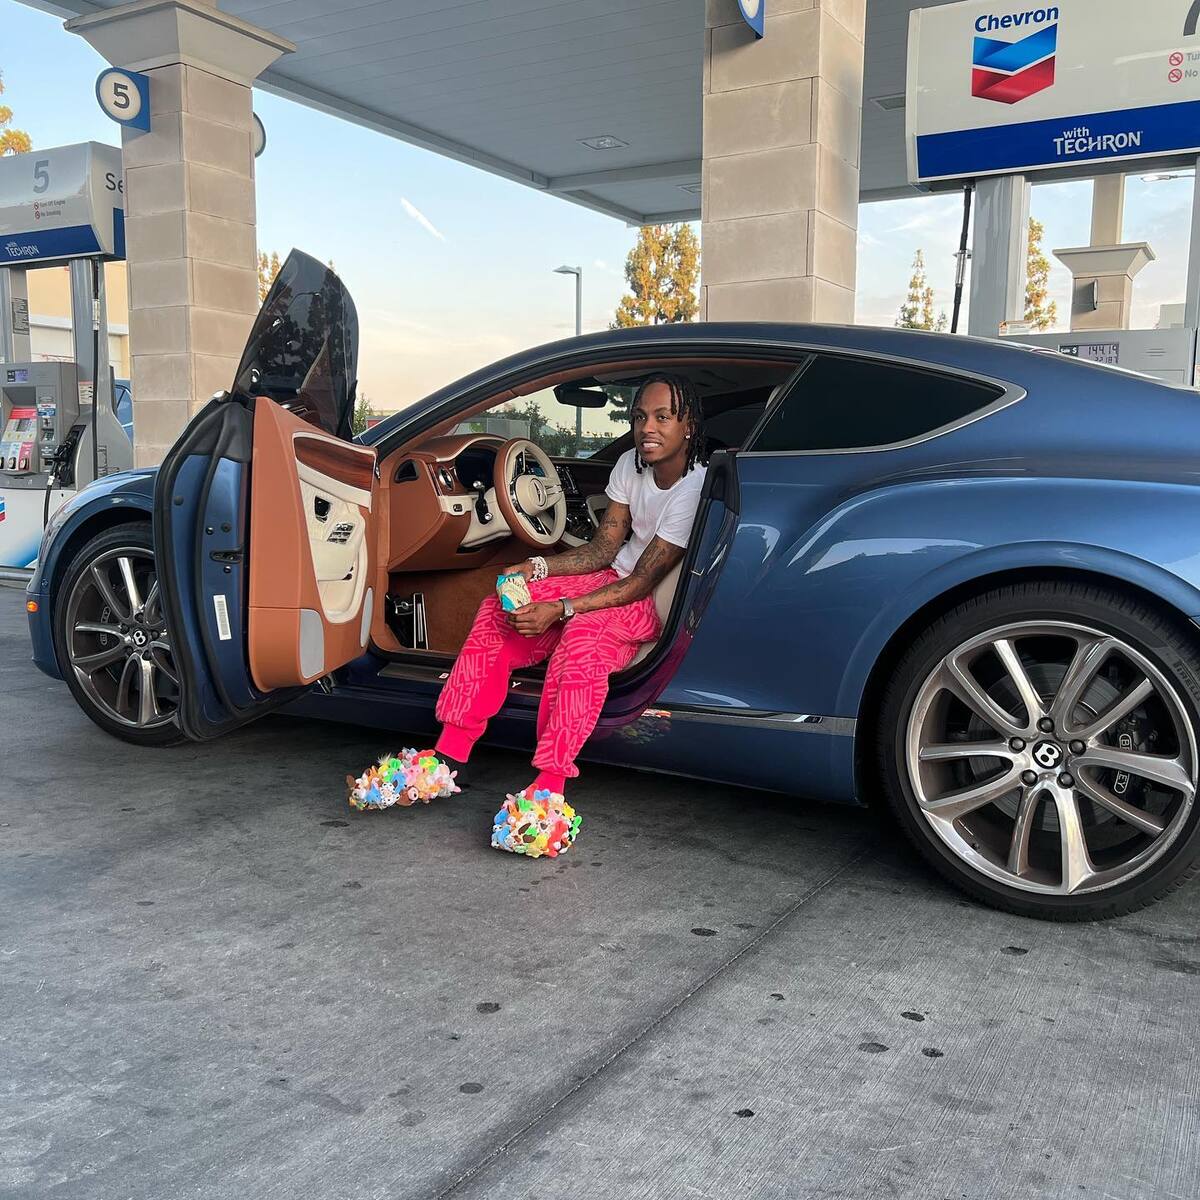 SPOTTED: Rich The Kid Rocks a Playful Ensemble Wearing Chanel